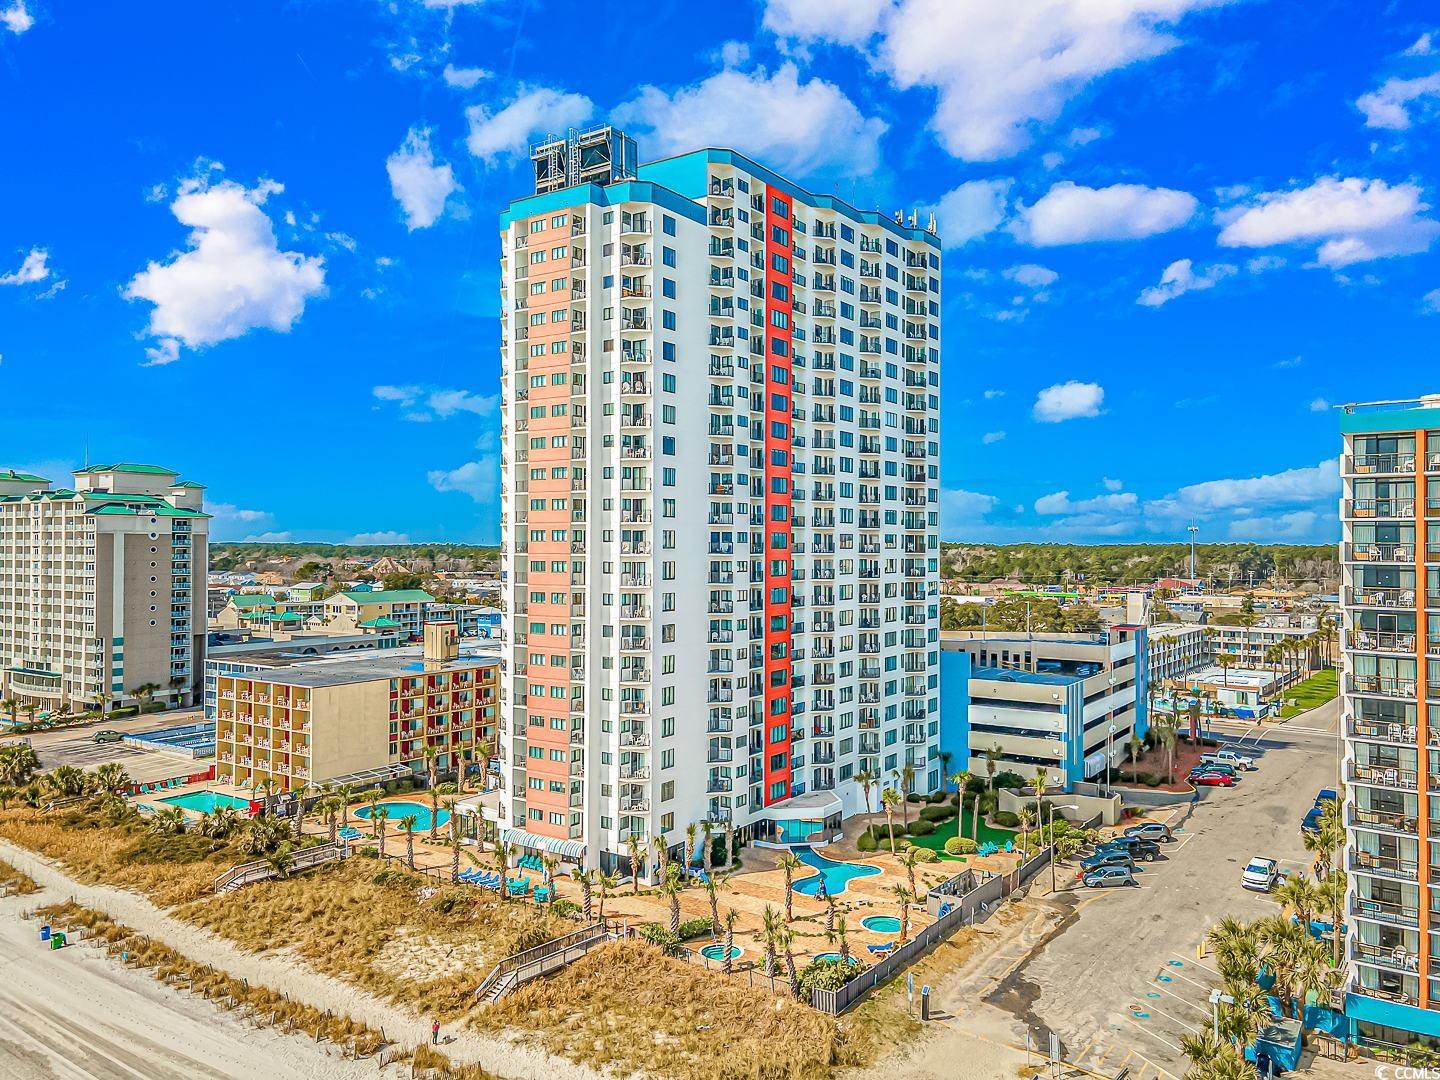 check out this 11th floor, ocean view, 1-bedroom apartment located at the palace resort in myrtle beach, sc.  the condo is fully furnished and the layout will accommodate 4 guests.  upon entry, guests will enter into the kitchen and living room area.  unlike many 1-bedroom properties in town, you do not have to walk through the bedroom to get in and out of the condo!  directly to the right is where the full bathroom is located.  the bathroom features a tub, shower, vanity with sink, mirror, and toilet.  the ac unit is located in the utility closet just outside the bathroom.  continuing through the apartment, the private bedroom is also located on the right side of the apartment.  the bedroom features 1 queen bed, closet, dresser for storage, nightstand, cable tv with over 100 channels to choose from, access to the ocean view balcony, blackout curtains, and a beautiful barn door for privacy.  entering into the living room, guests will find the most relaxing part of the entire condo!  the living room is open and spacious, and features endless, north-facing views of the ocean.  the 11th floor offers such great views; not too high, not too low!  the living room offers a dining table and chairs, queen-sized sleeper sofa, accent chairs, end tables, cable tv with over 100 channels to choose from, and access to the ocean view balcony.  as of march 2022, a beautiful shiplap wall was built and an led electric fireplace was installed.  a brand new sleeper sofa was installed, including modern pieces of decor and accents.  the entire condo was painted, and a stylish barn door was installed in the bedroom.  new flooring is featured throughout.  this is truly a home away from home!  the kitchen is absolutely incredible and features brand new stainless steel appliances, new cabinets, and granite counter tops.  the homeowners spared no expense!  unlike many condos, this listing also features a full-size dishwasher as well as small appliances like a coffee maker and toaster.  cooking a large meal or a small snack will not be a problem!  the palace is a highly sought-after complex in myrtle beach, sc and is in close proximity to the myrtle beach boardwalk, sky wheel, restaurants, shopping, mini golf, attractions, myr airport, and so much more.  call the listing agent to schedule a showing today!